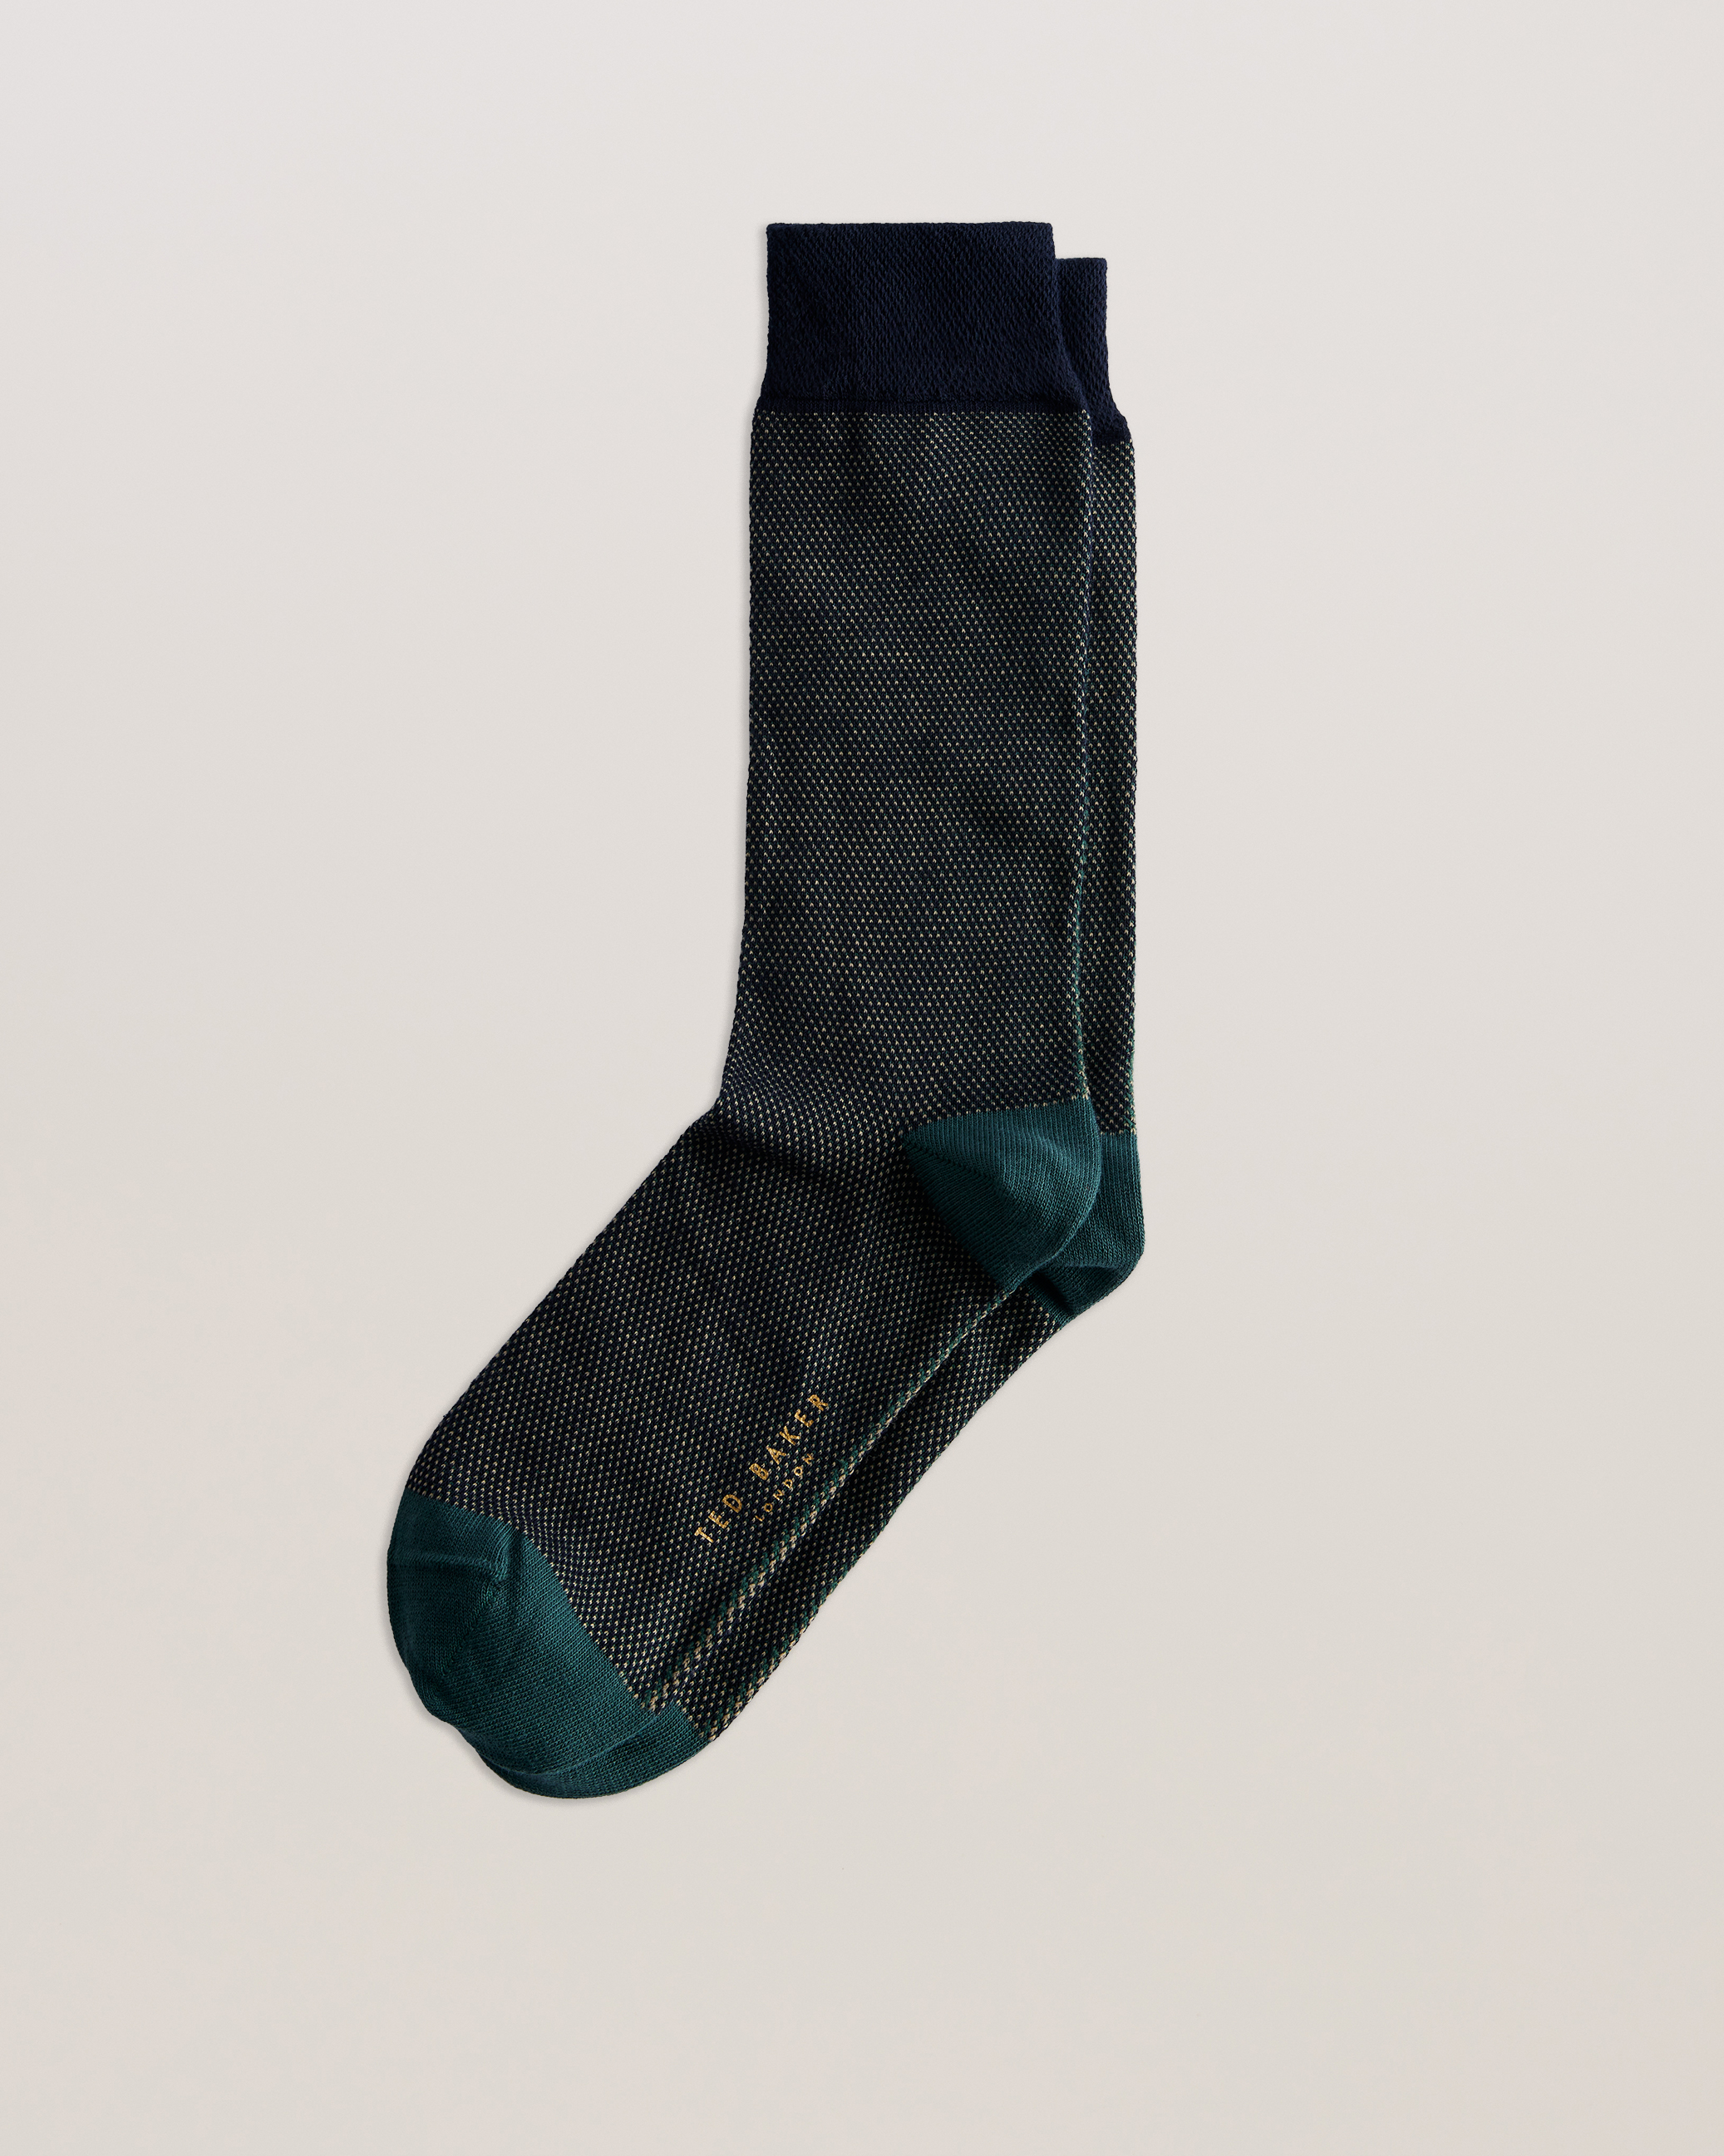 3pk Assorted Cotton Rich Socks, Ted Baker